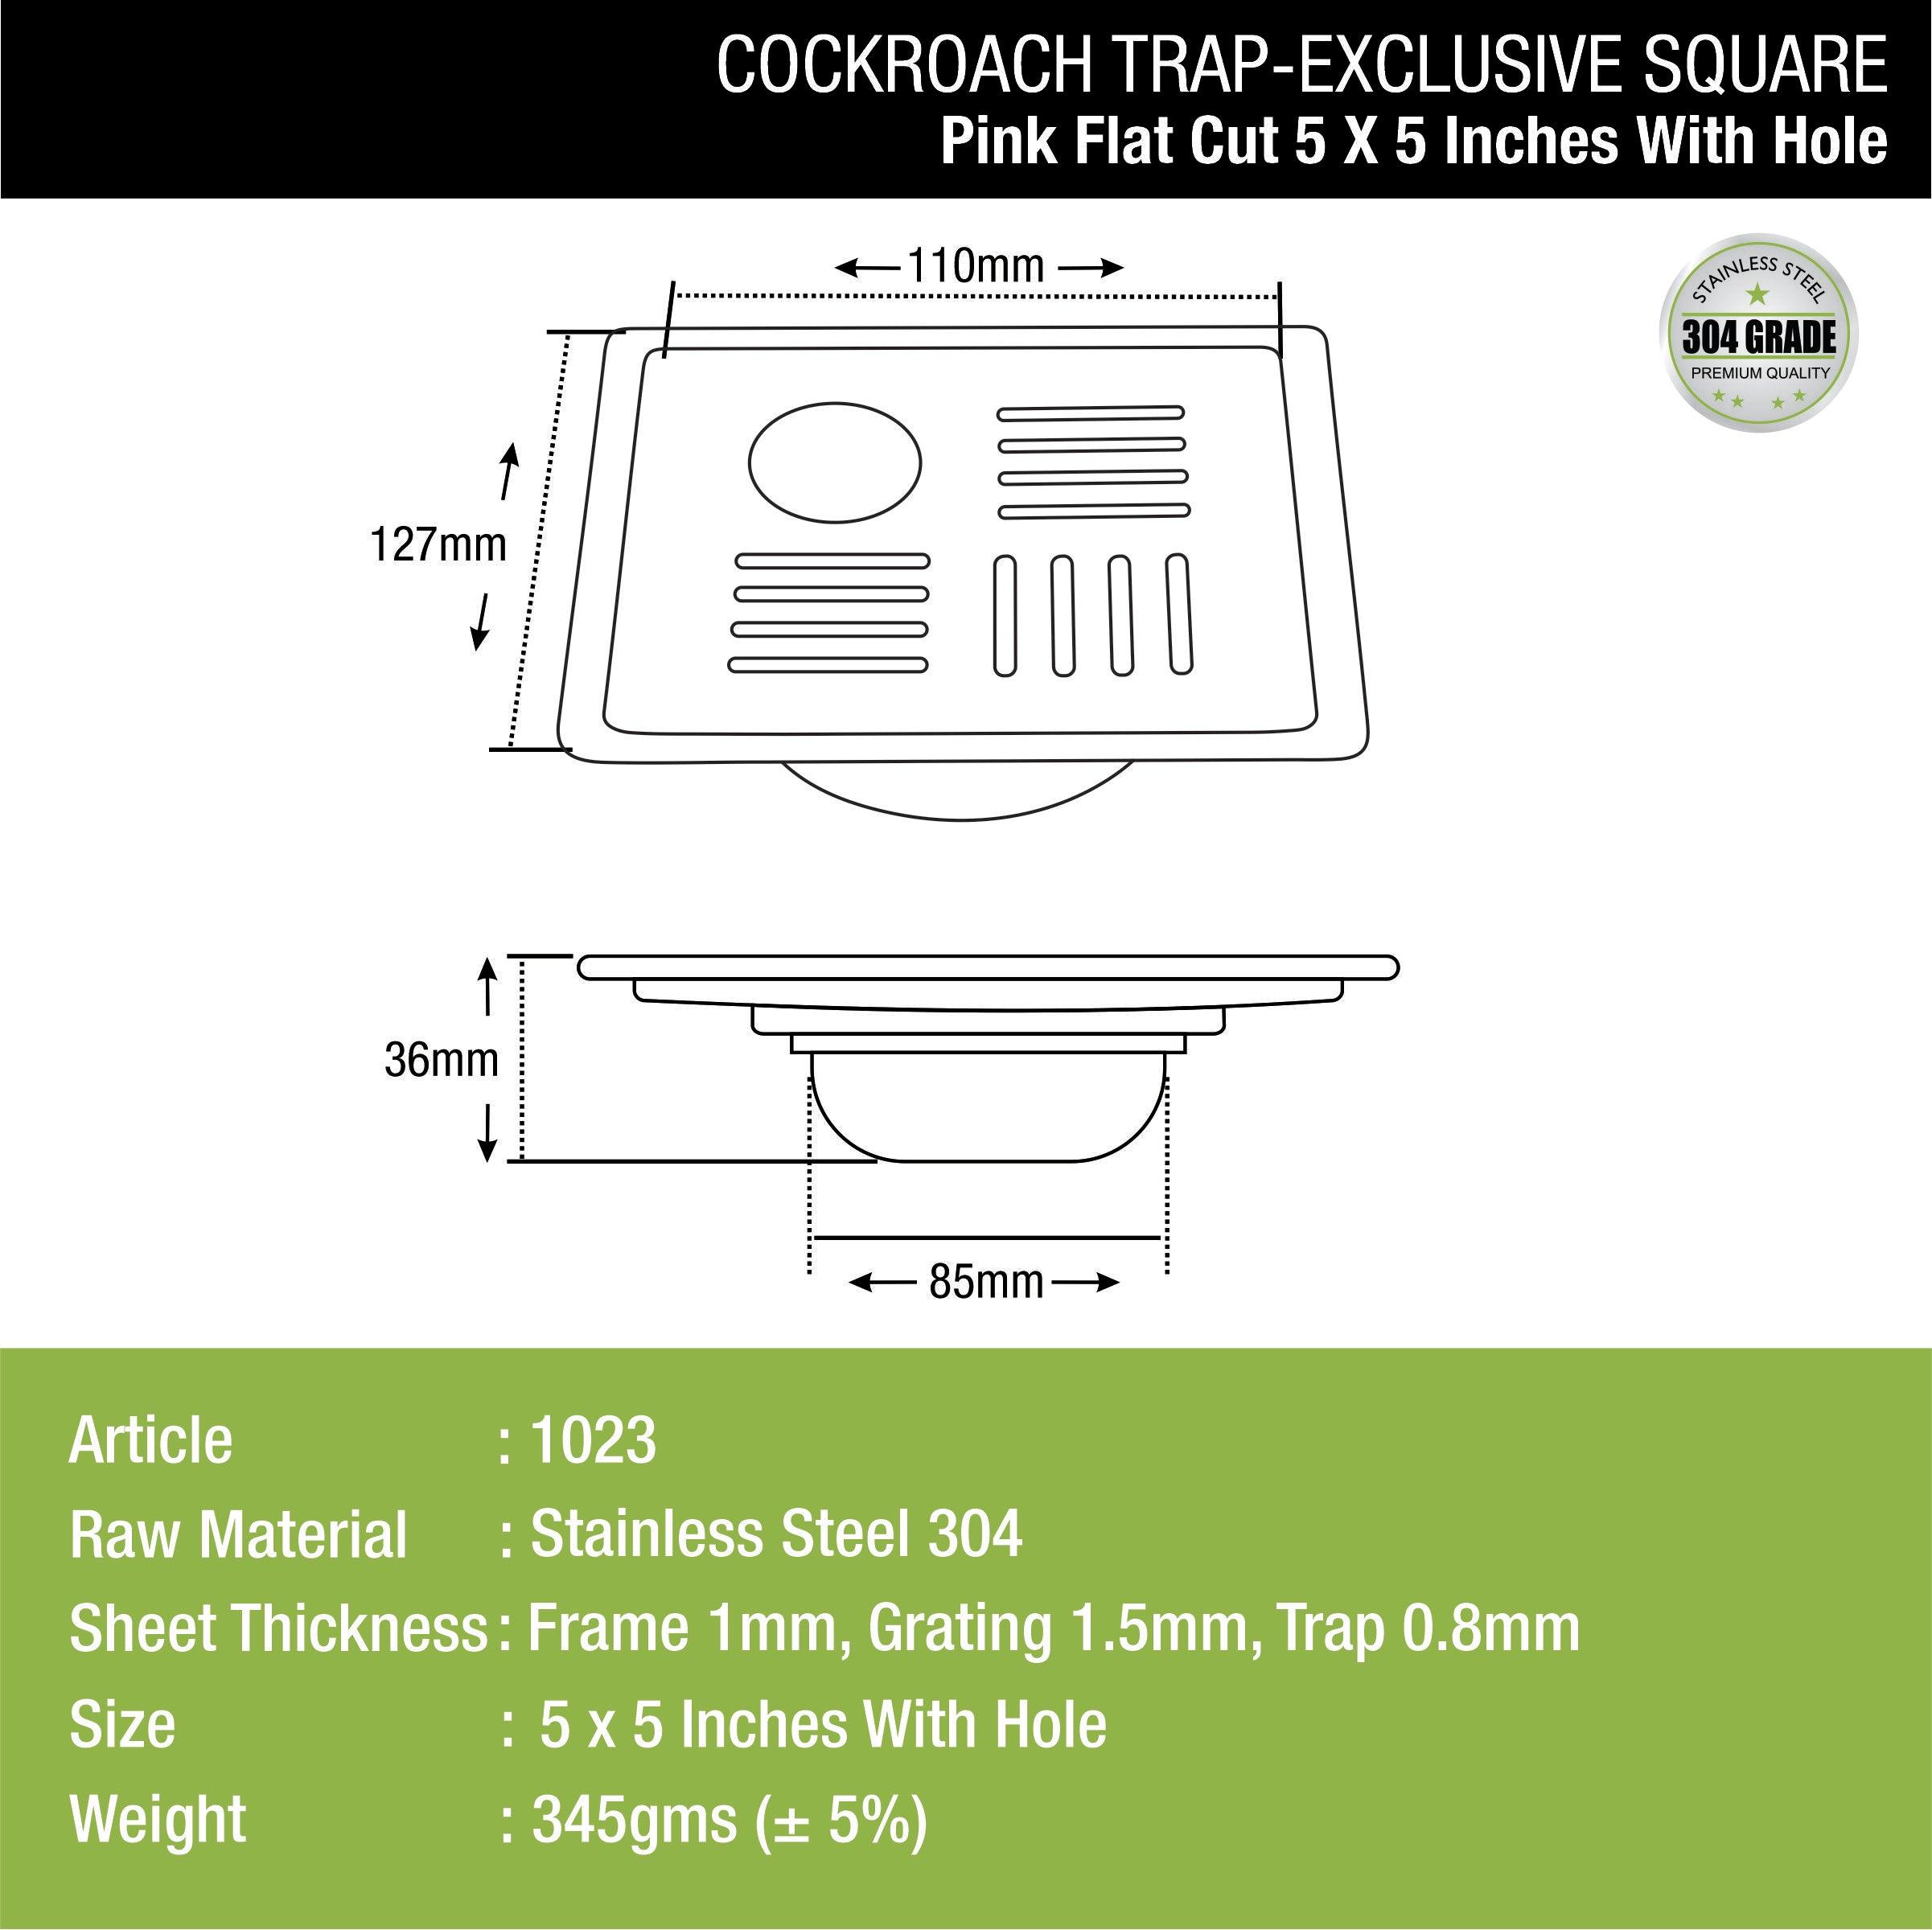 Pink Exclusive Square Flat Cut Floor Drain (5 x 5 Inches) with Hole and Cockroach Trap dimensions and sizes